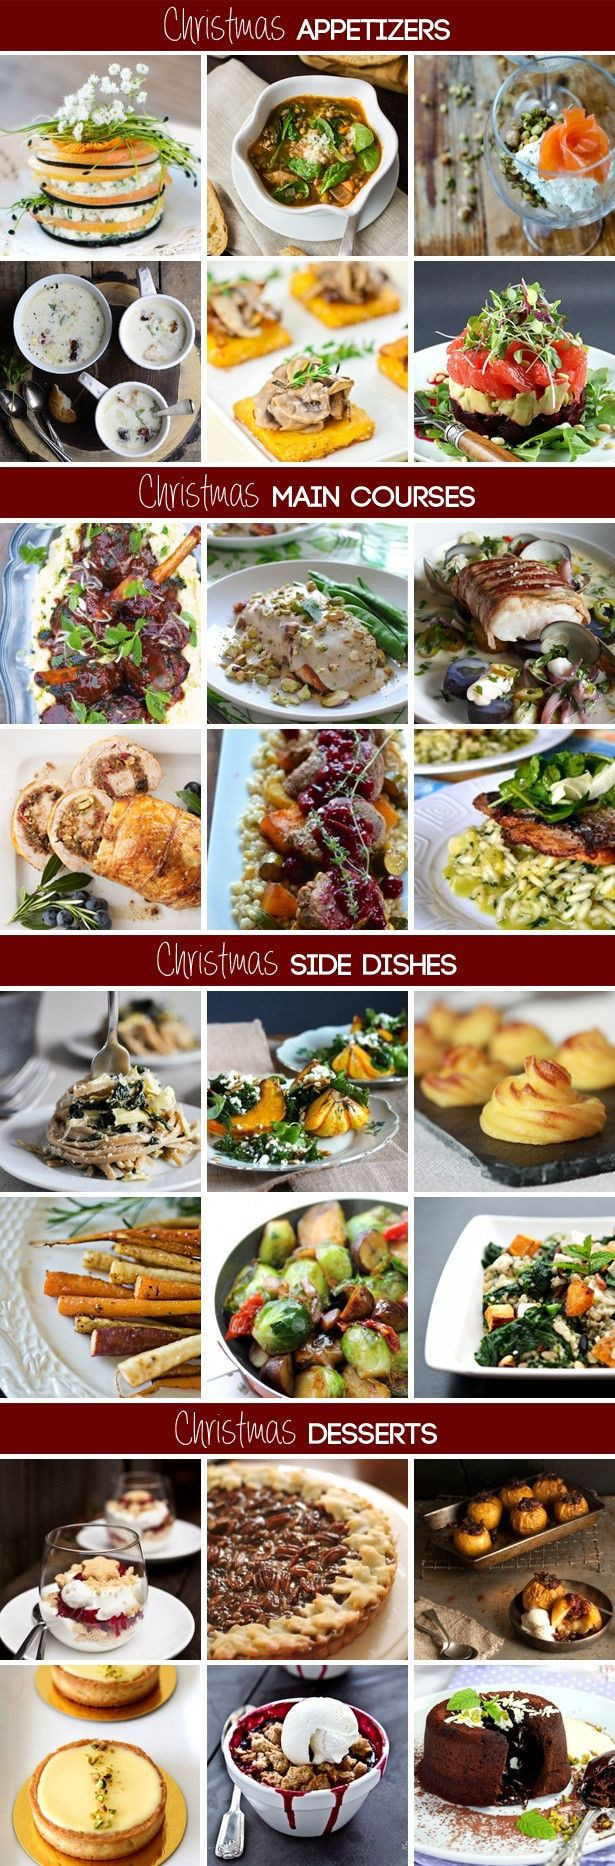 Christmas Side Dishes Pinterest
 christmas recipes meals dinner menu appetizers main